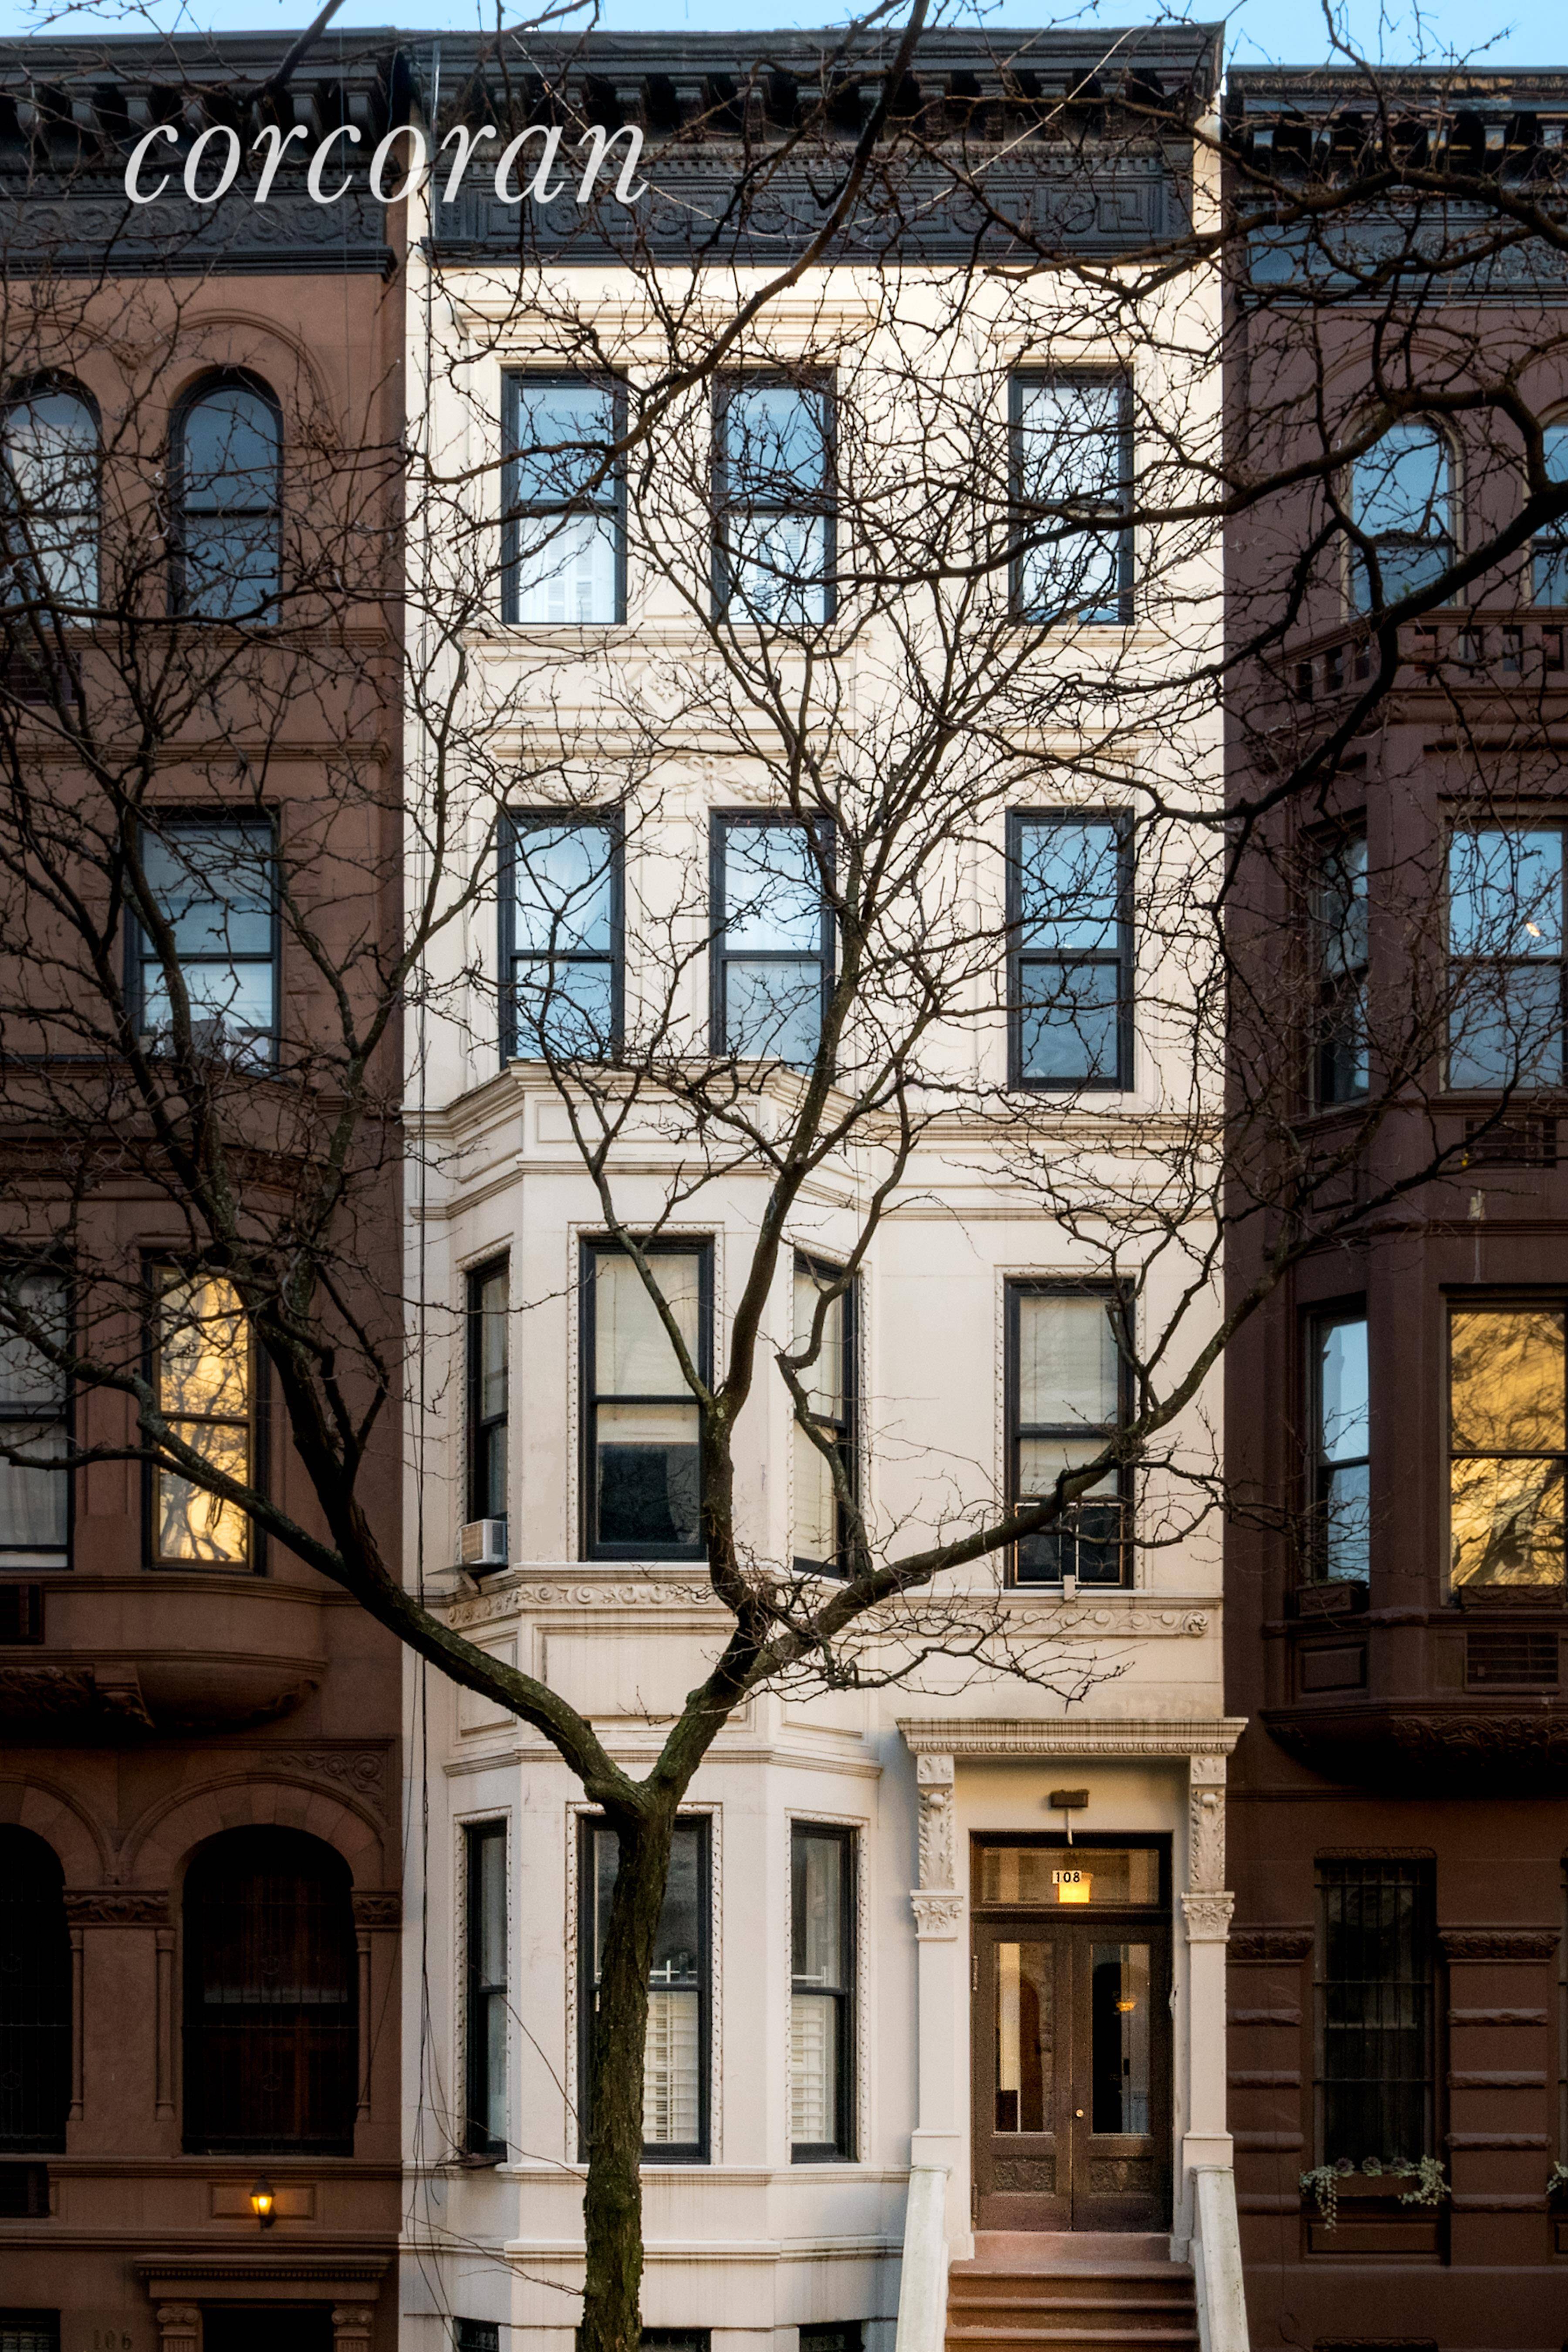 108 West 80th St is a stately brownstone designed by renowned New York City architect George F.